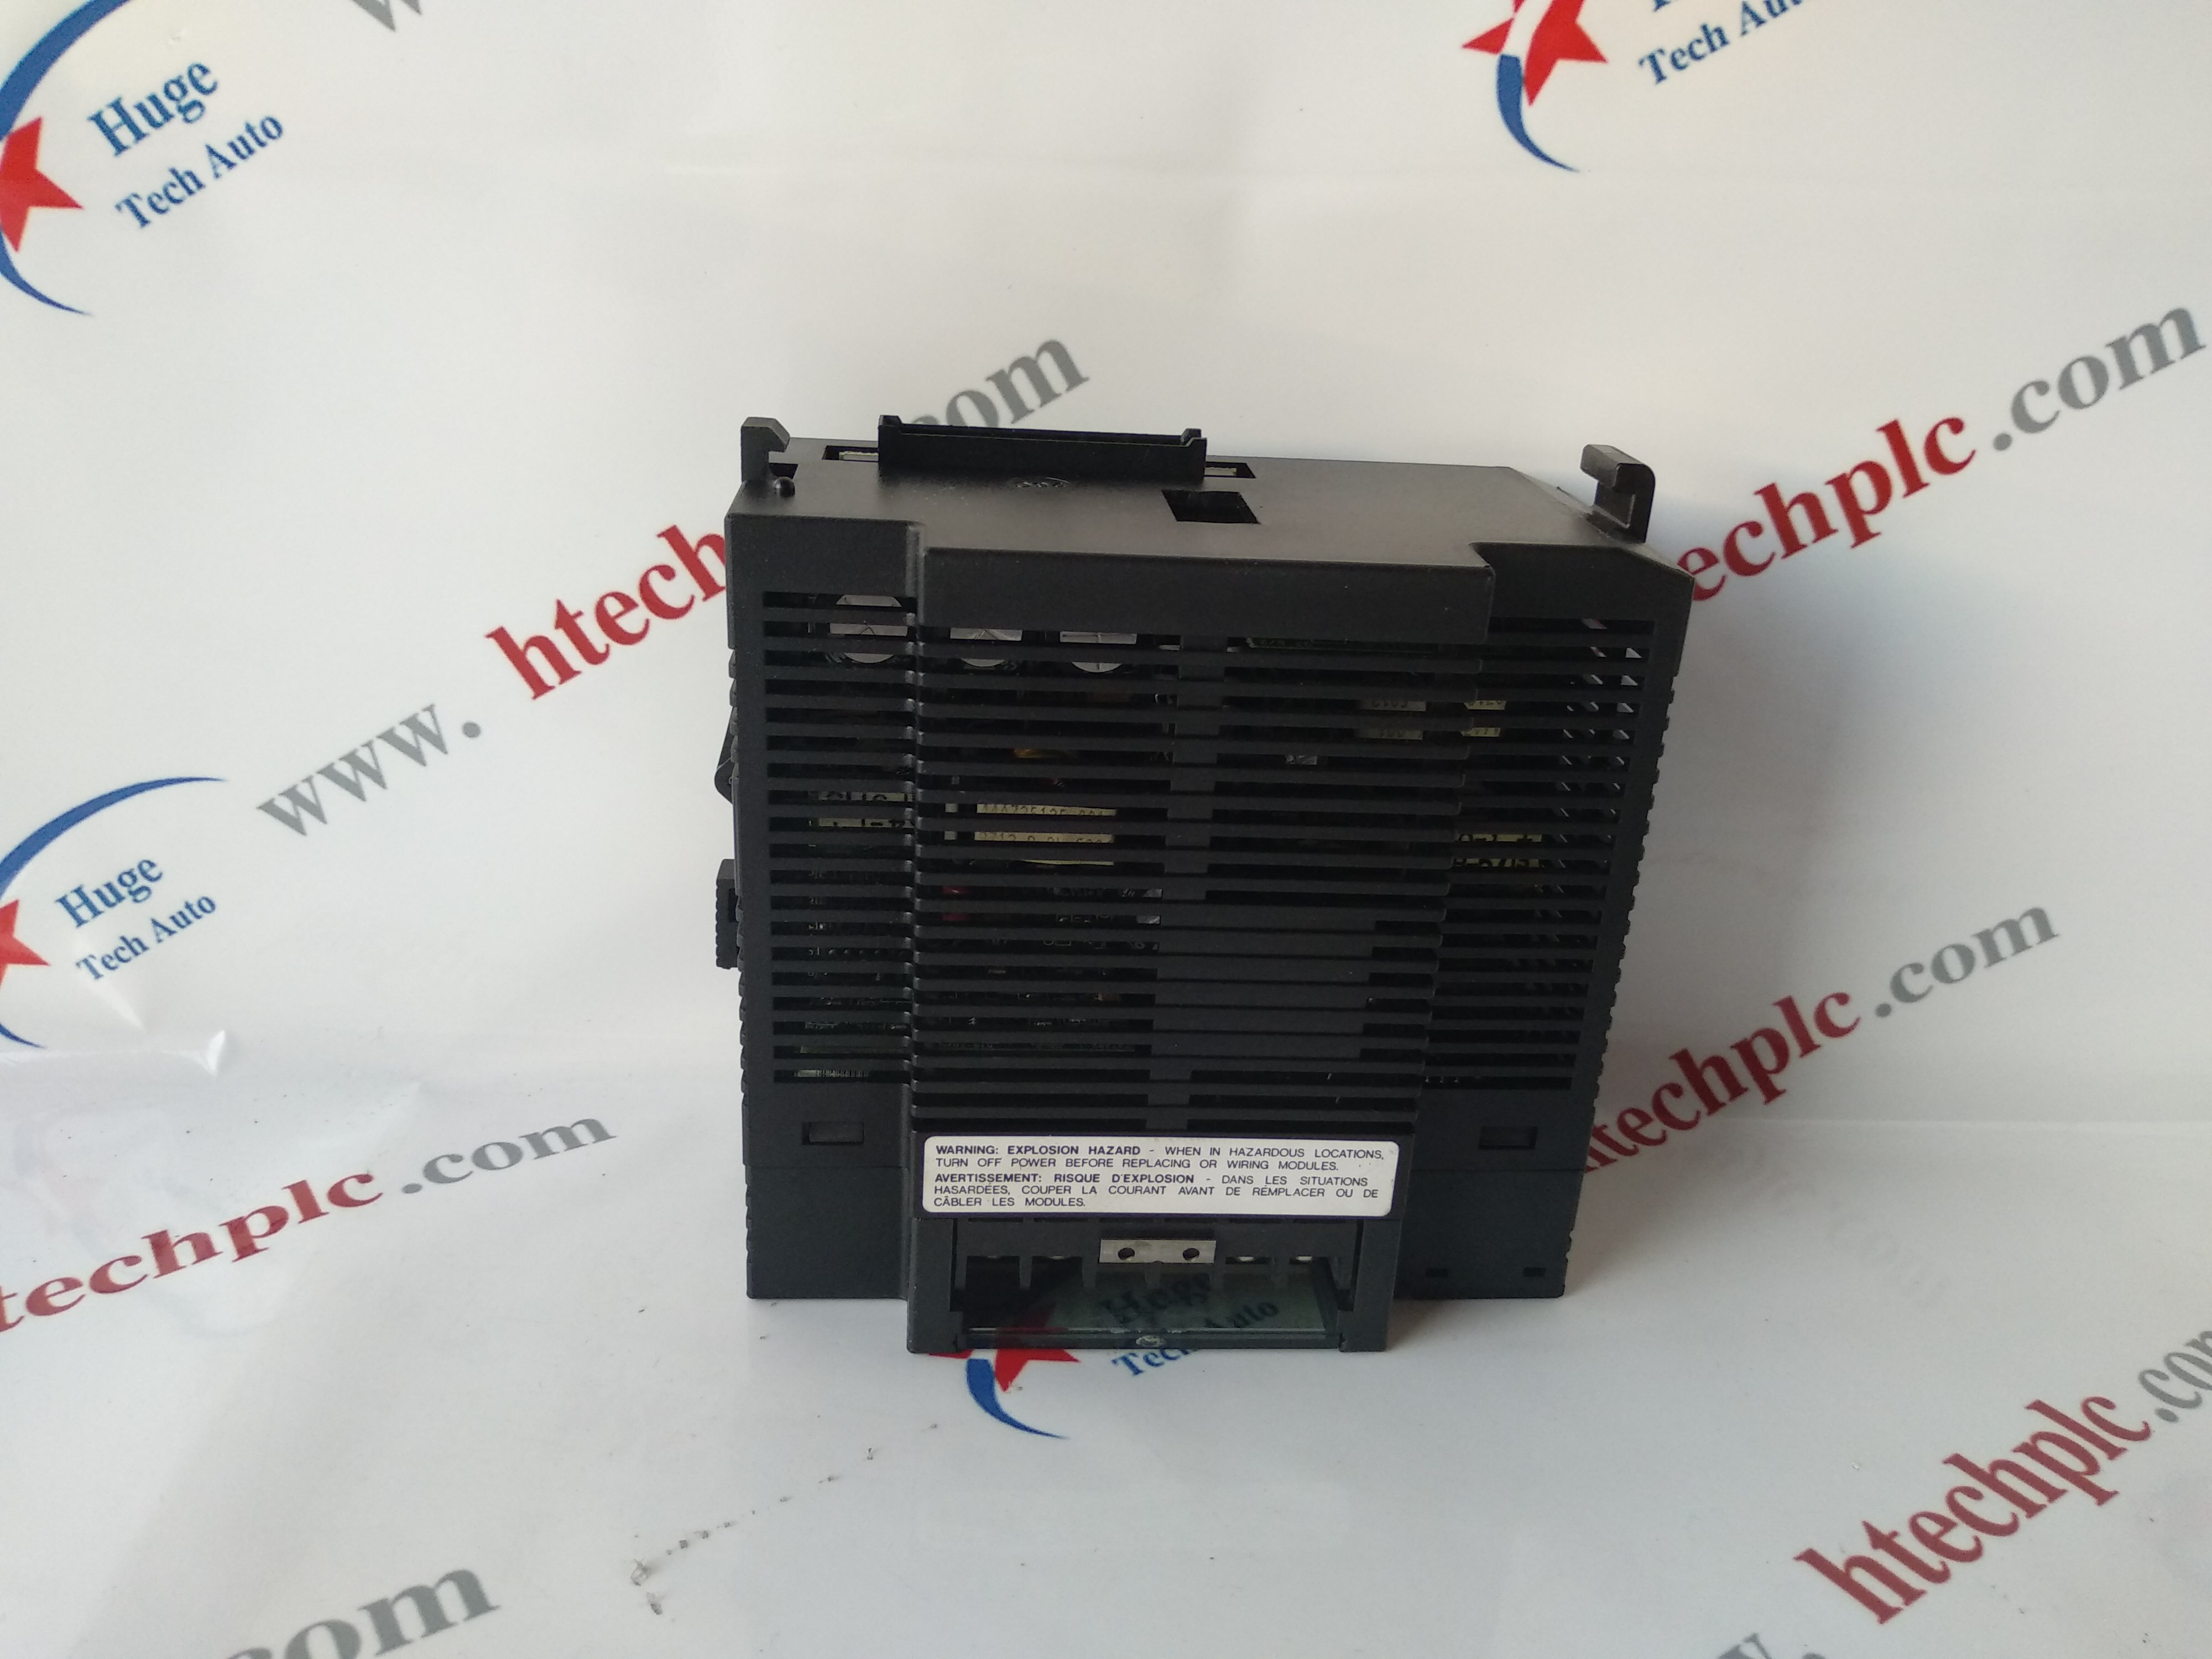 GE 531X121PCRAGG1 brand new PLC DCS TSI system spare parts in stock